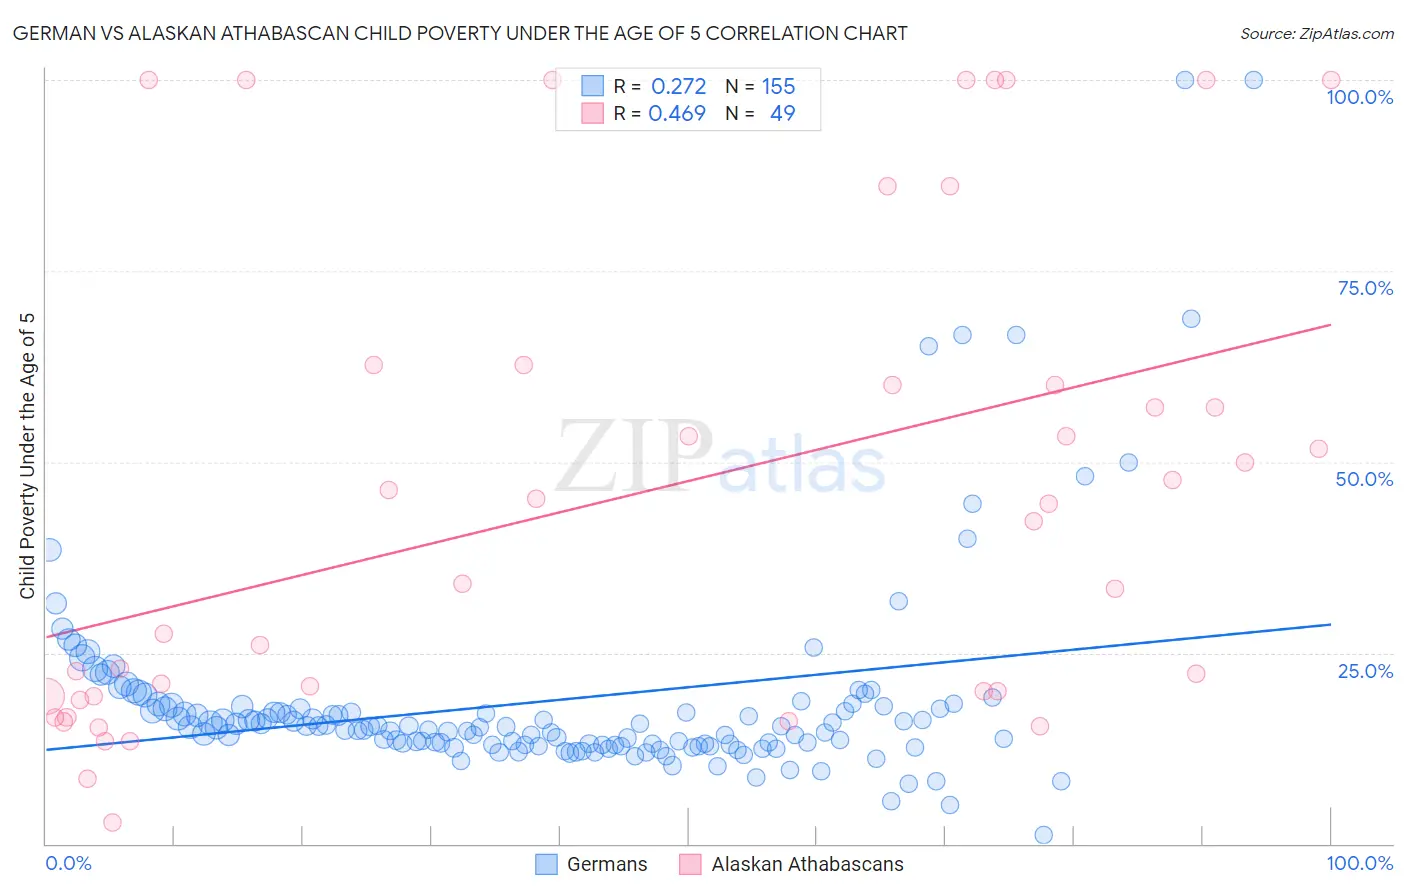 German vs Alaskan Athabascan Child Poverty Under the Age of 5